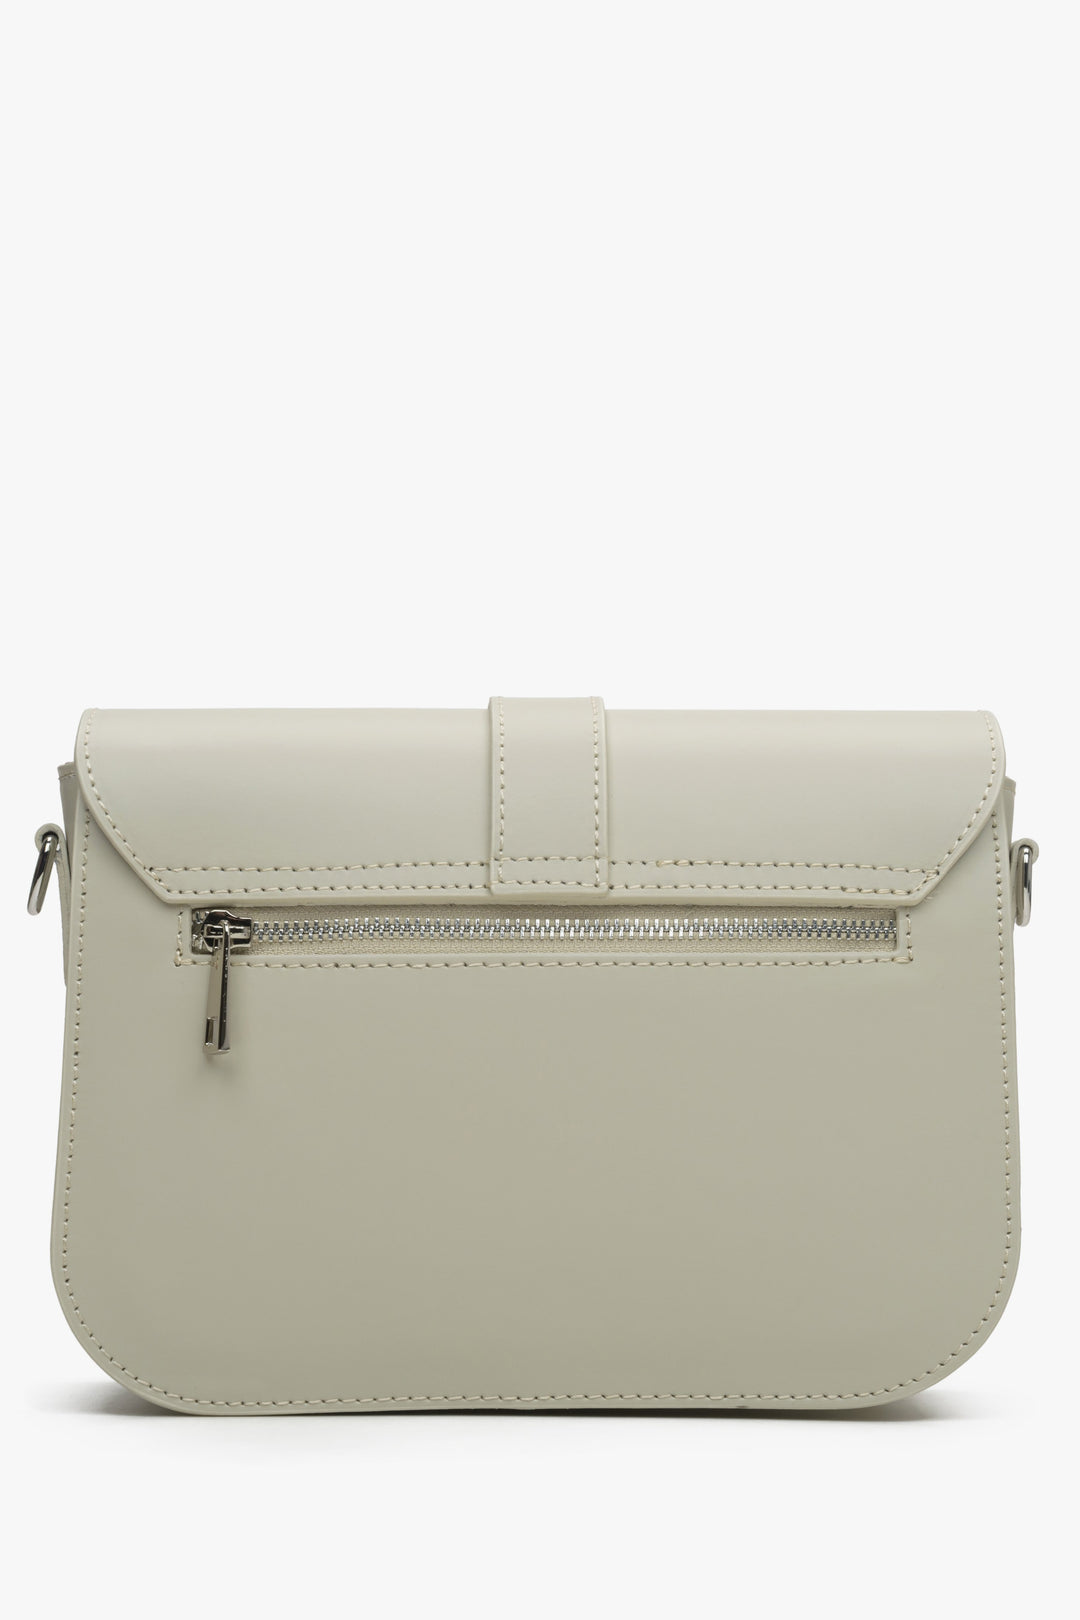 Women's grey and beige handbag made of genuine leather by Estro - reverse side.